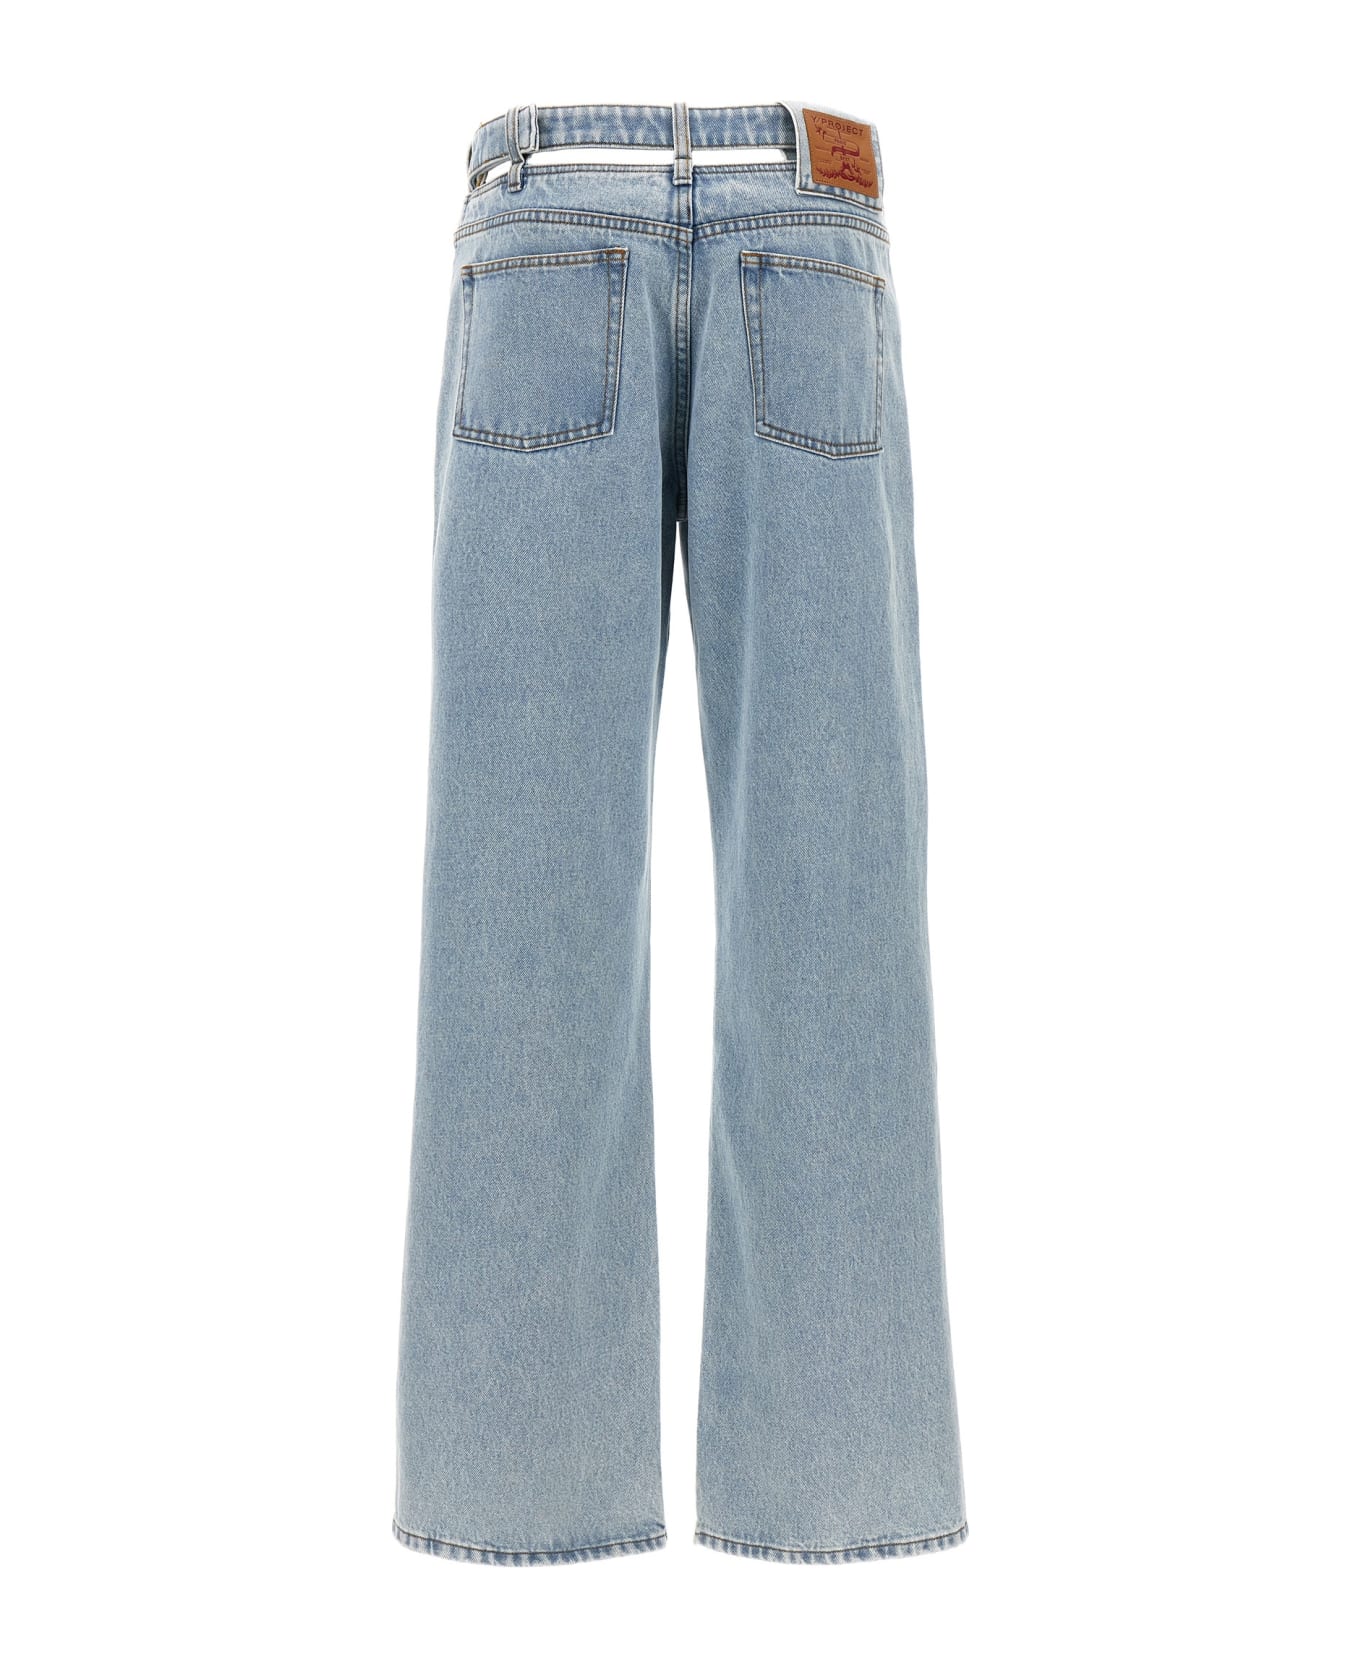 Y/Project 'evergreen Y Belt' Jeans - Light Blue デニム